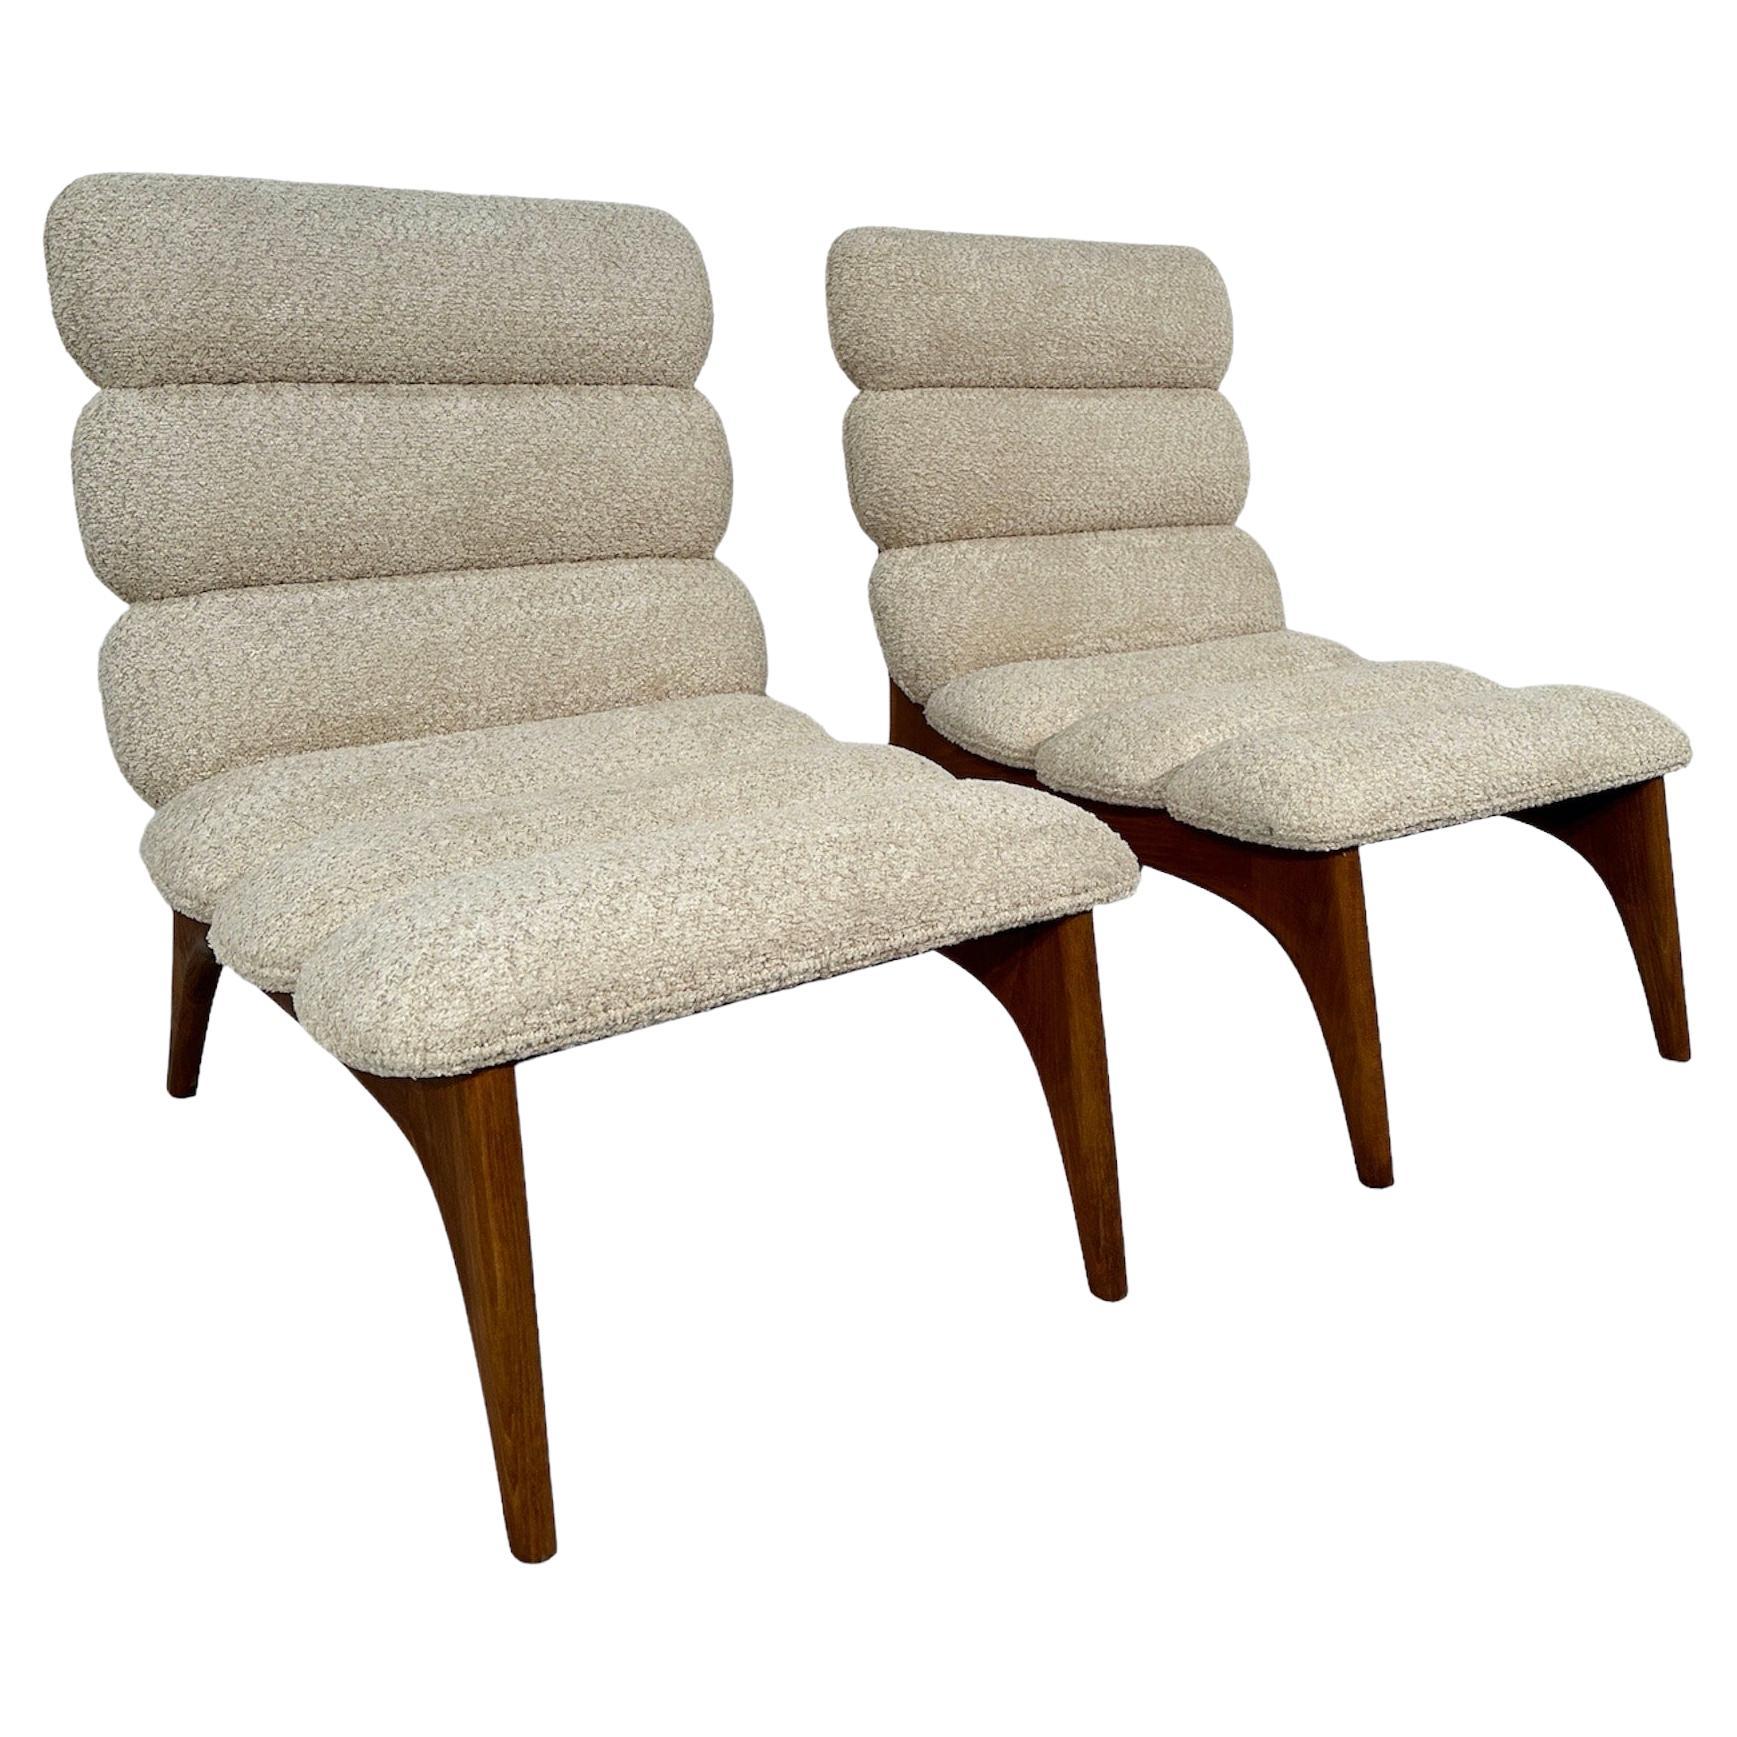 Pair of Mid-Century Modern Danish Lounge Chairs in Boucle Fabric 1980s